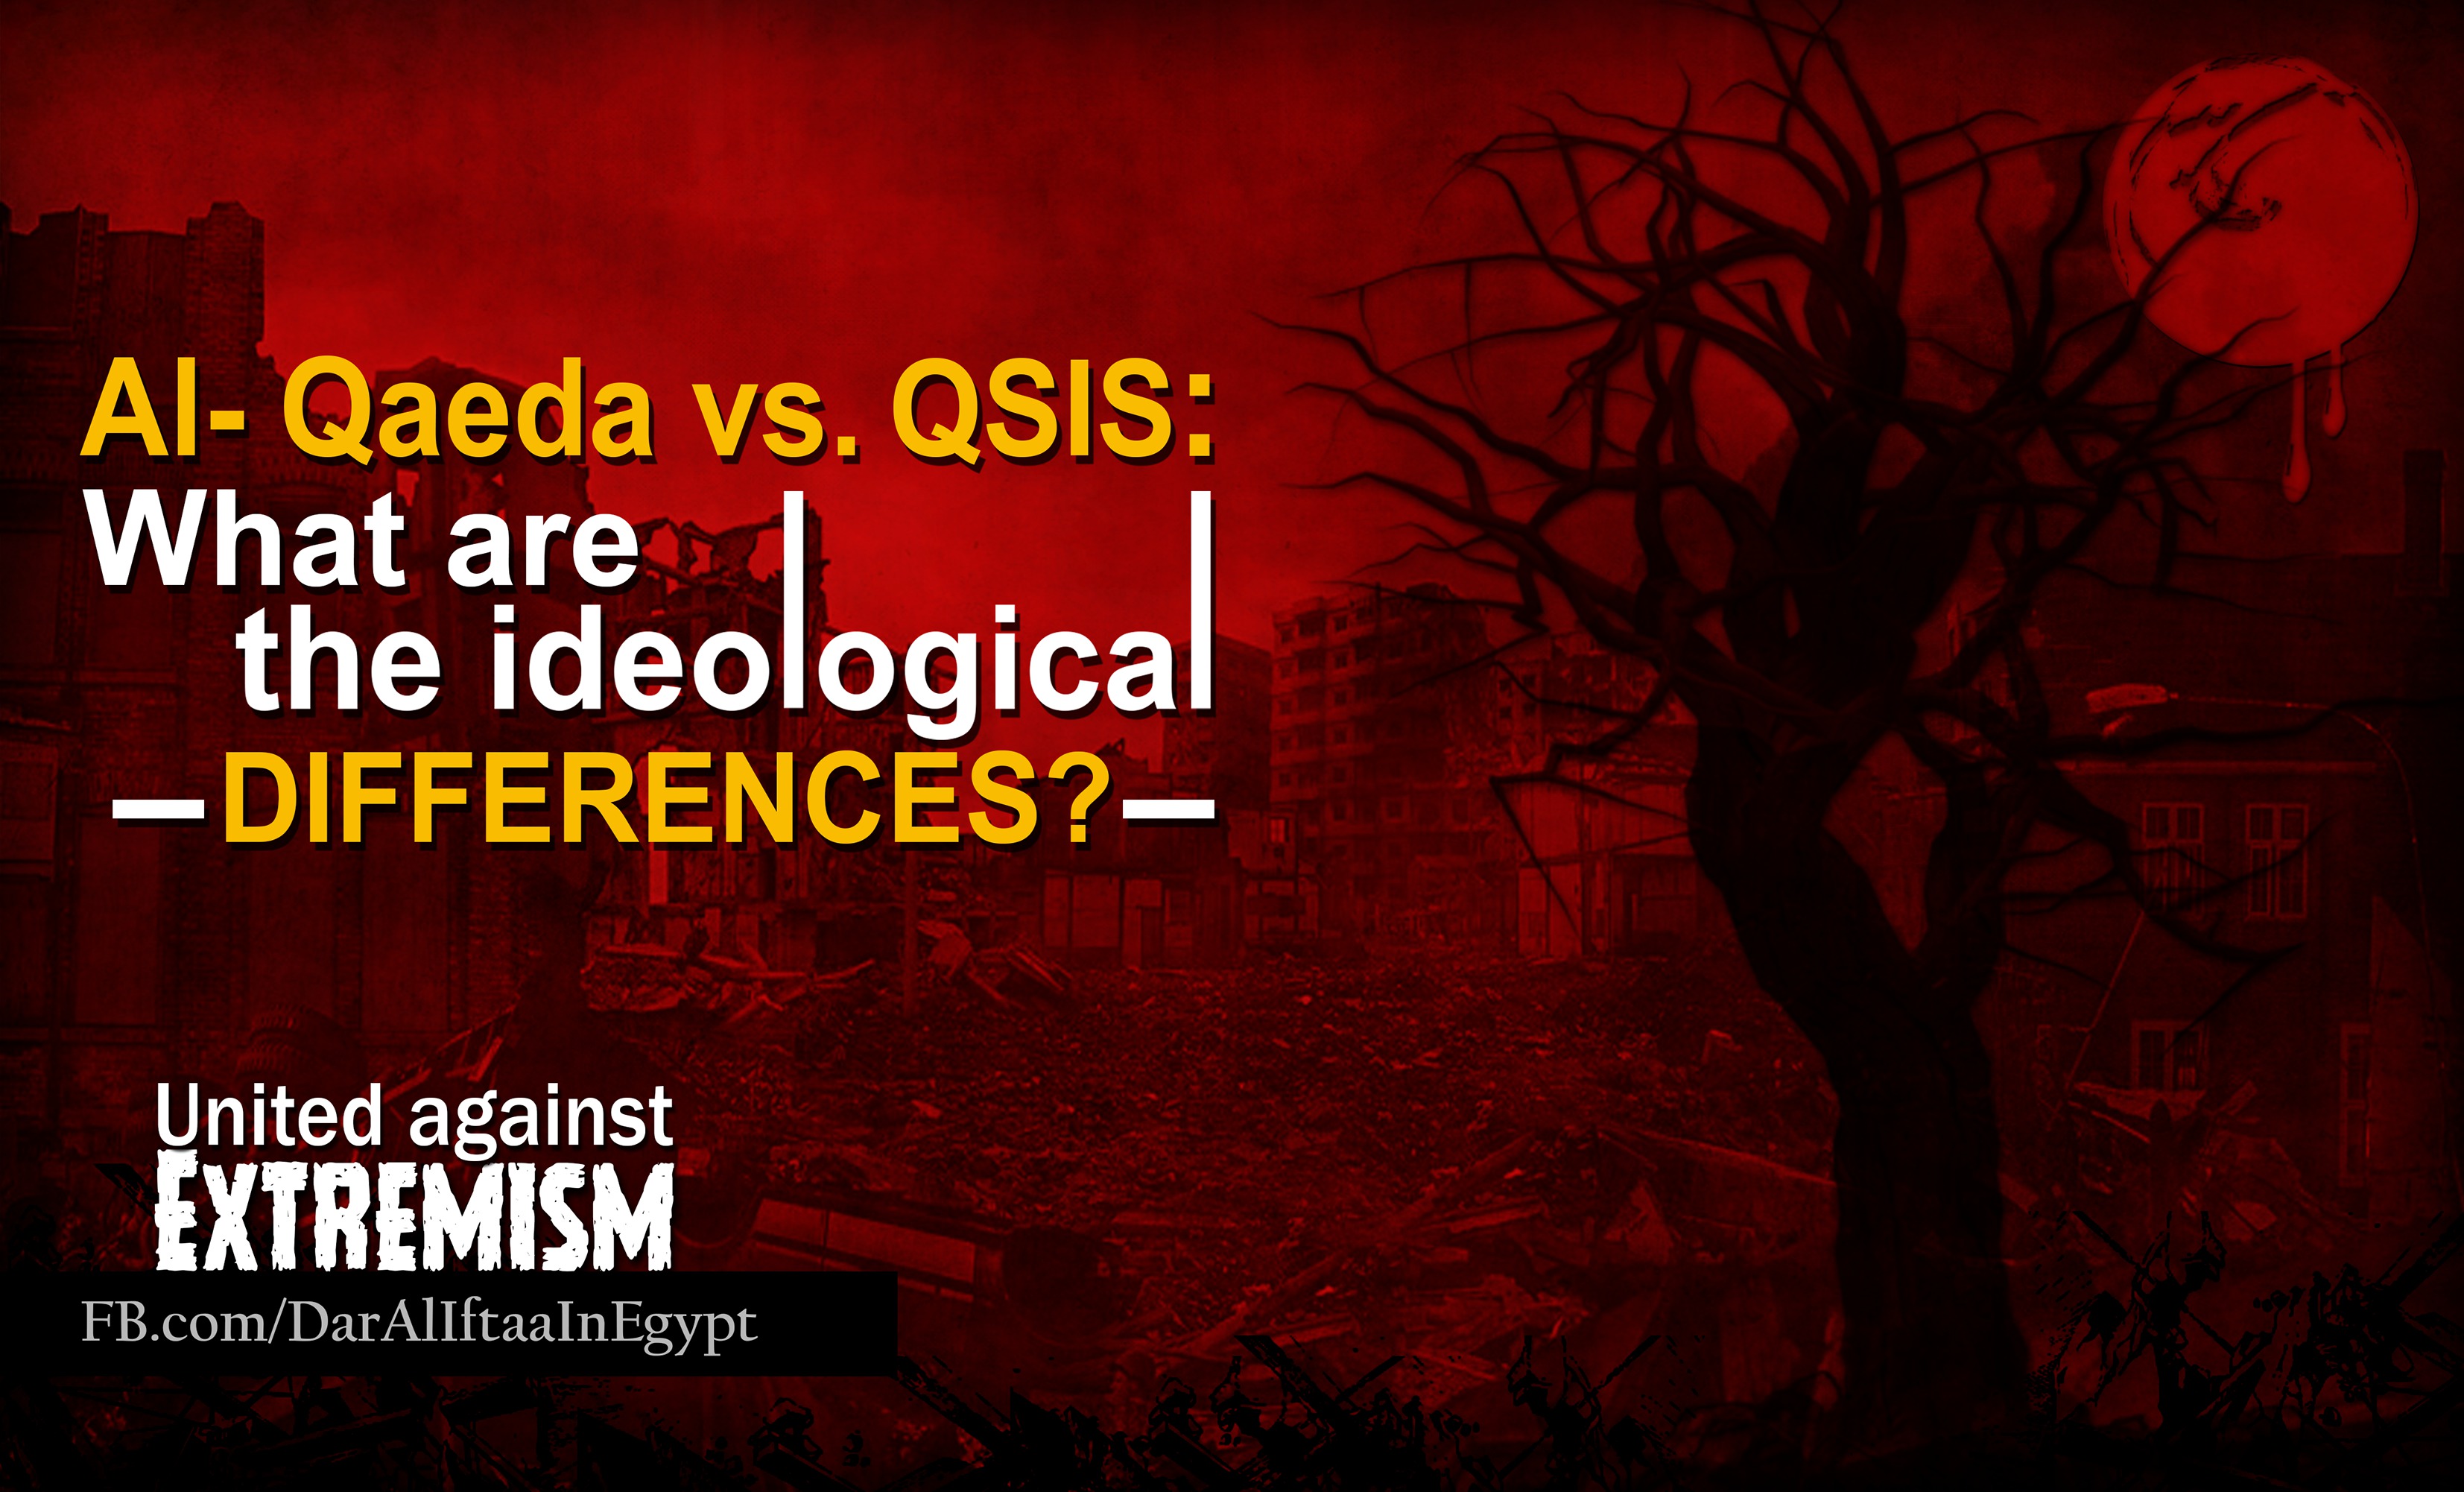 Al- Qaeda vs. QSIS: What are the Ideological Differences?